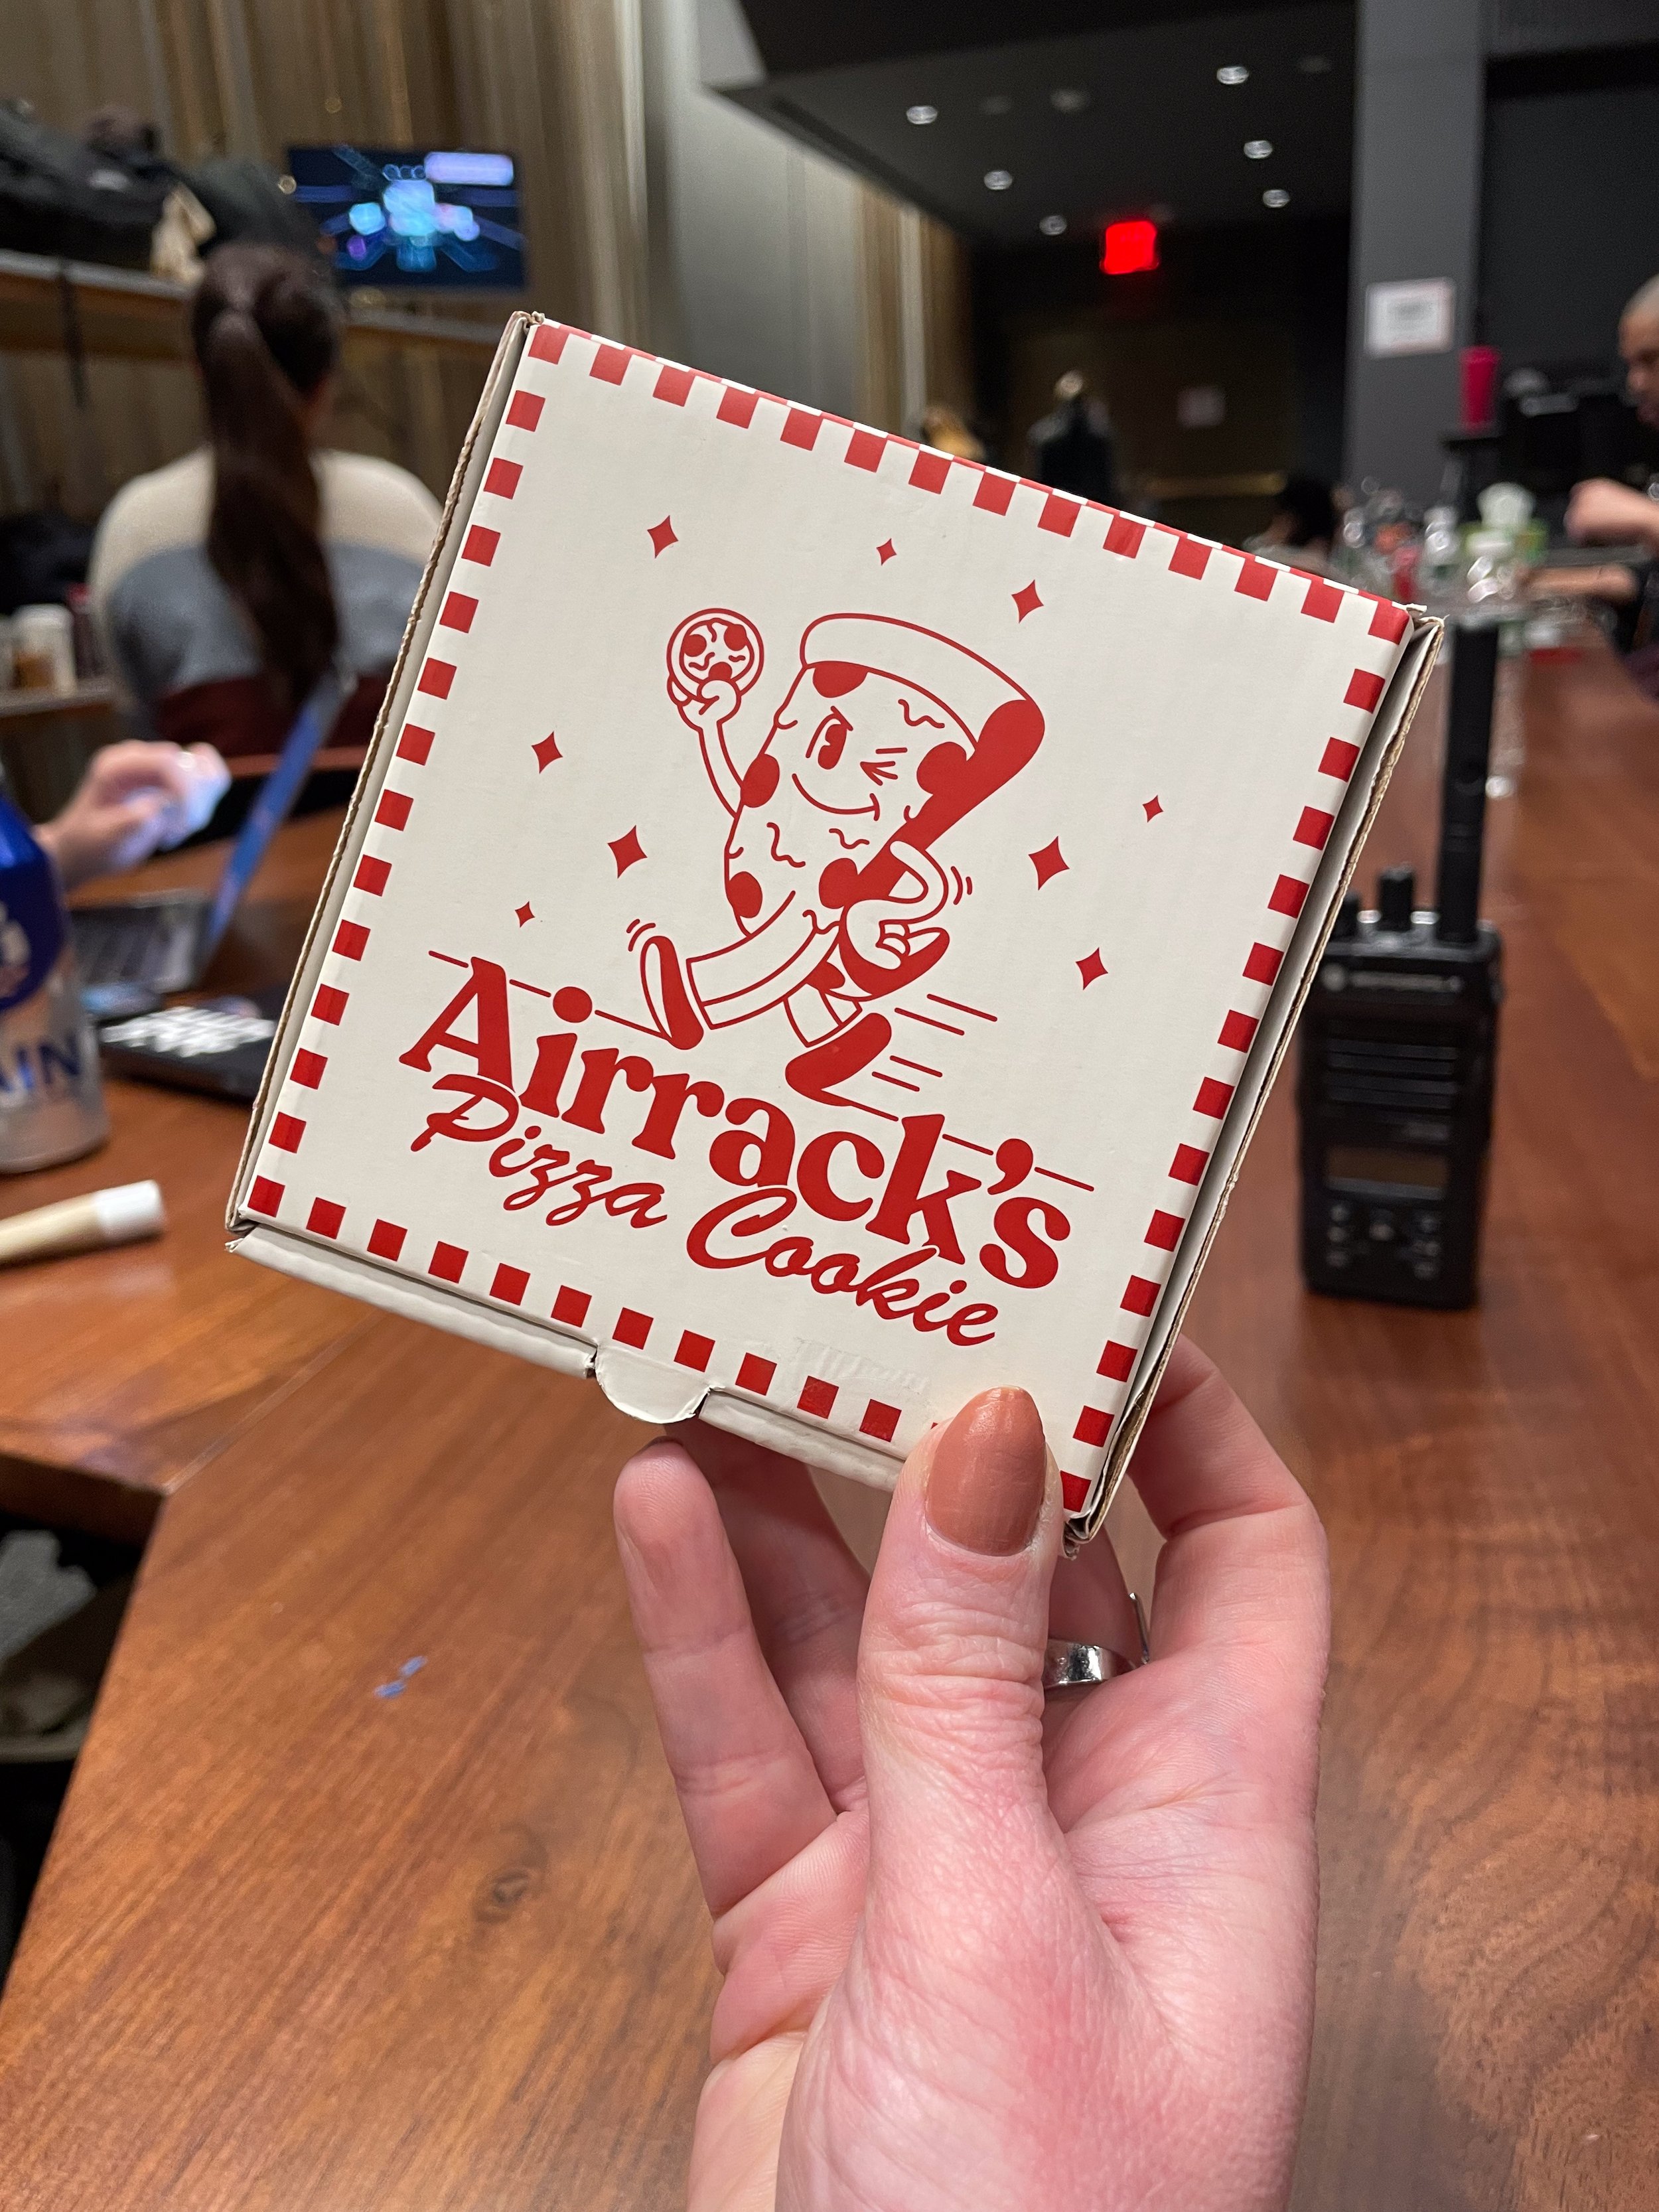  Show giveaways, like these pizza cookie boxes for YouTube creator Airrack, were whimsically designed to enhance guest experience and support his best known video challenge. 